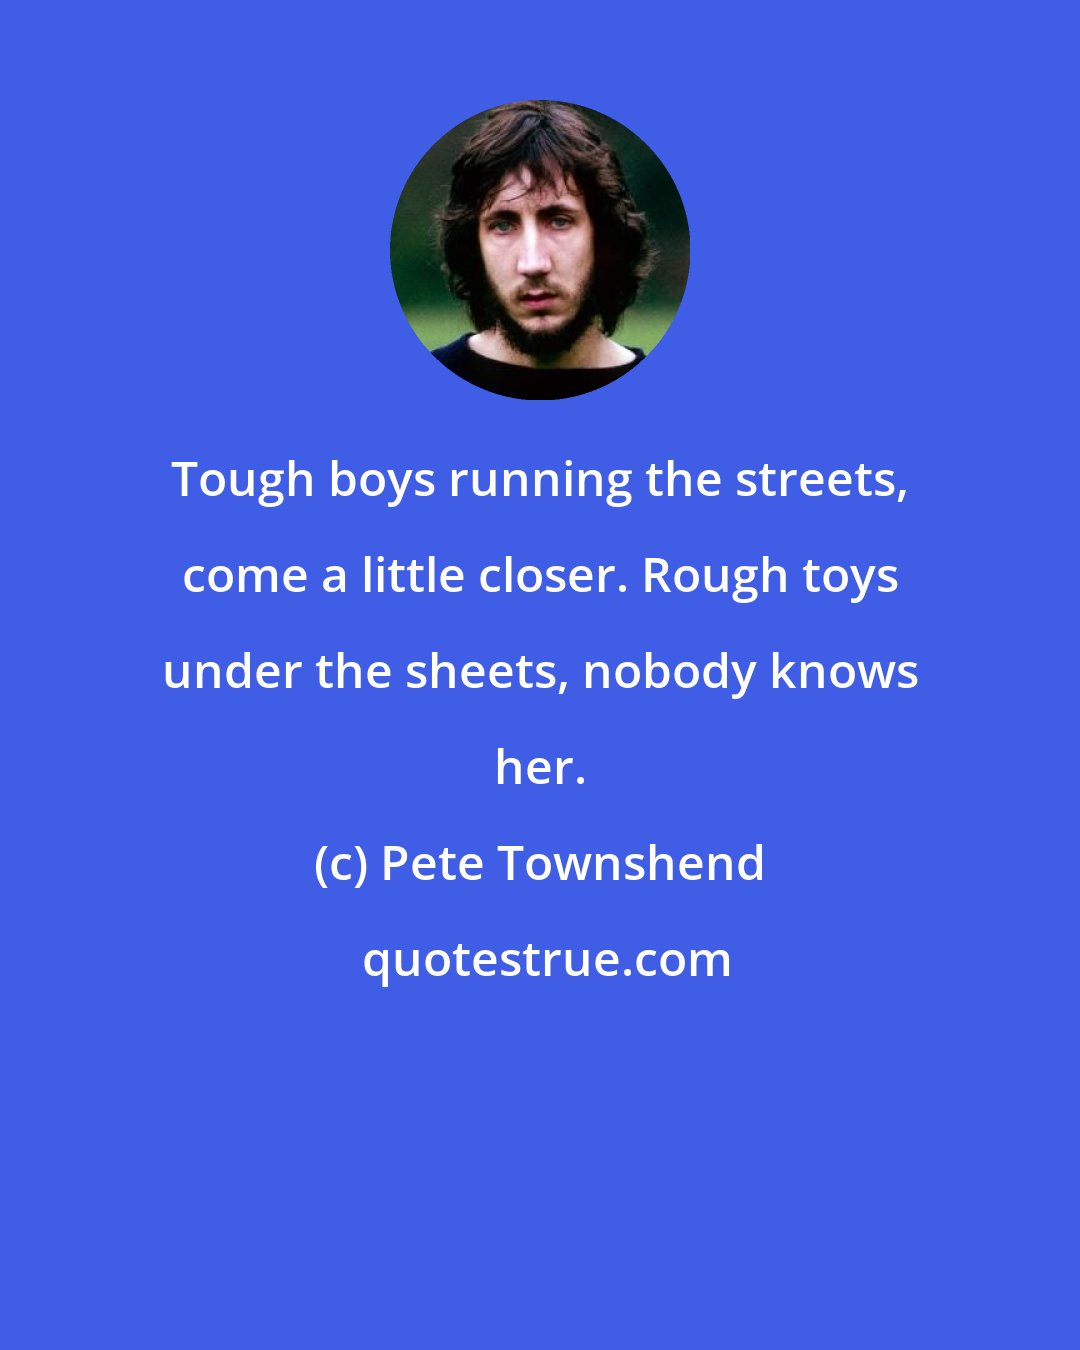 Pete Townshend: Tough boys running the streets, come a little closer. Rough toys under the sheets, nobody knows her.